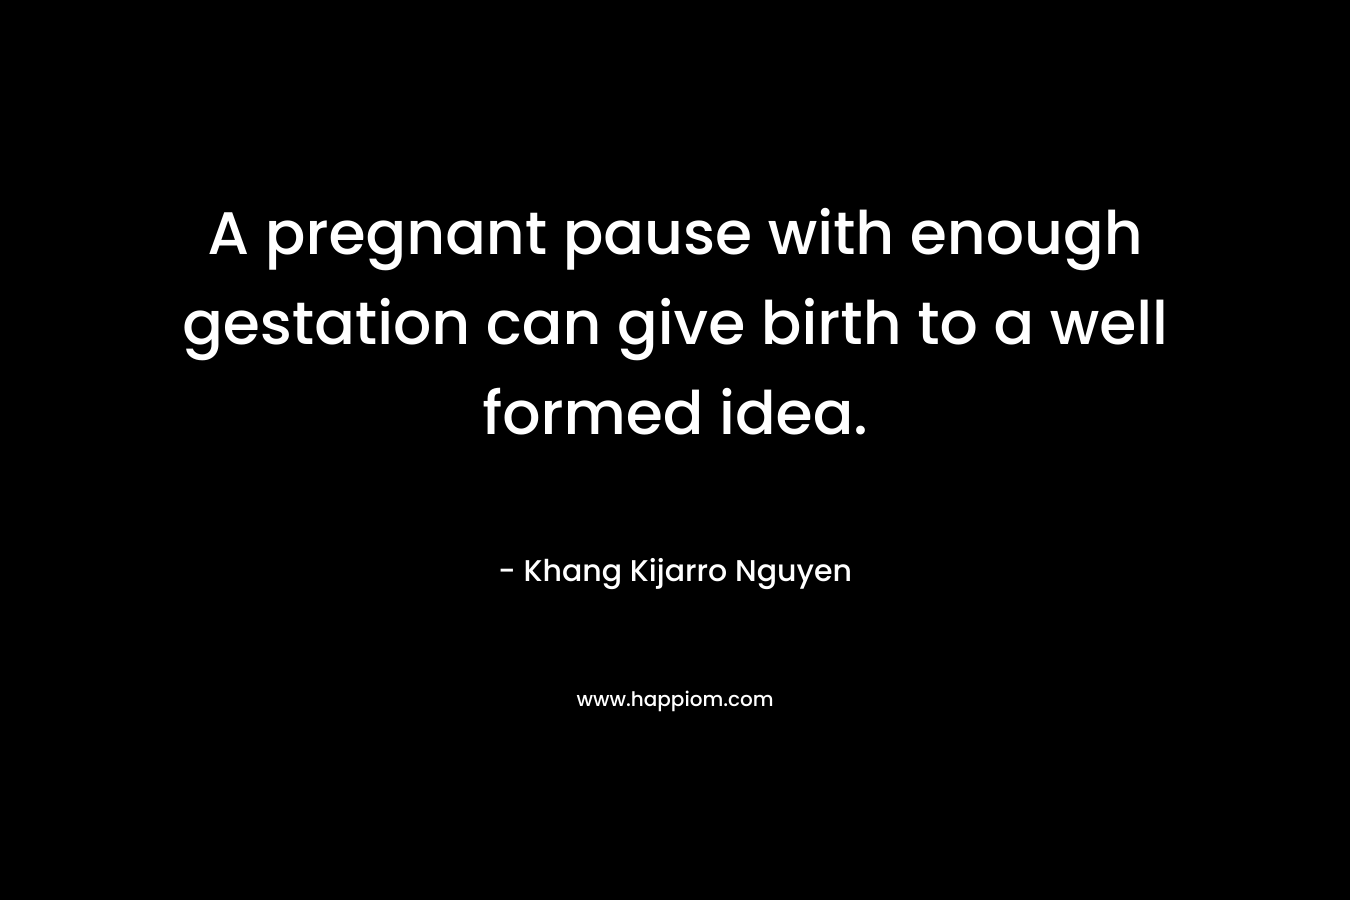 A pregnant pause with enough gestation can give birth to a well formed idea. – Khang Kijarro Nguyen